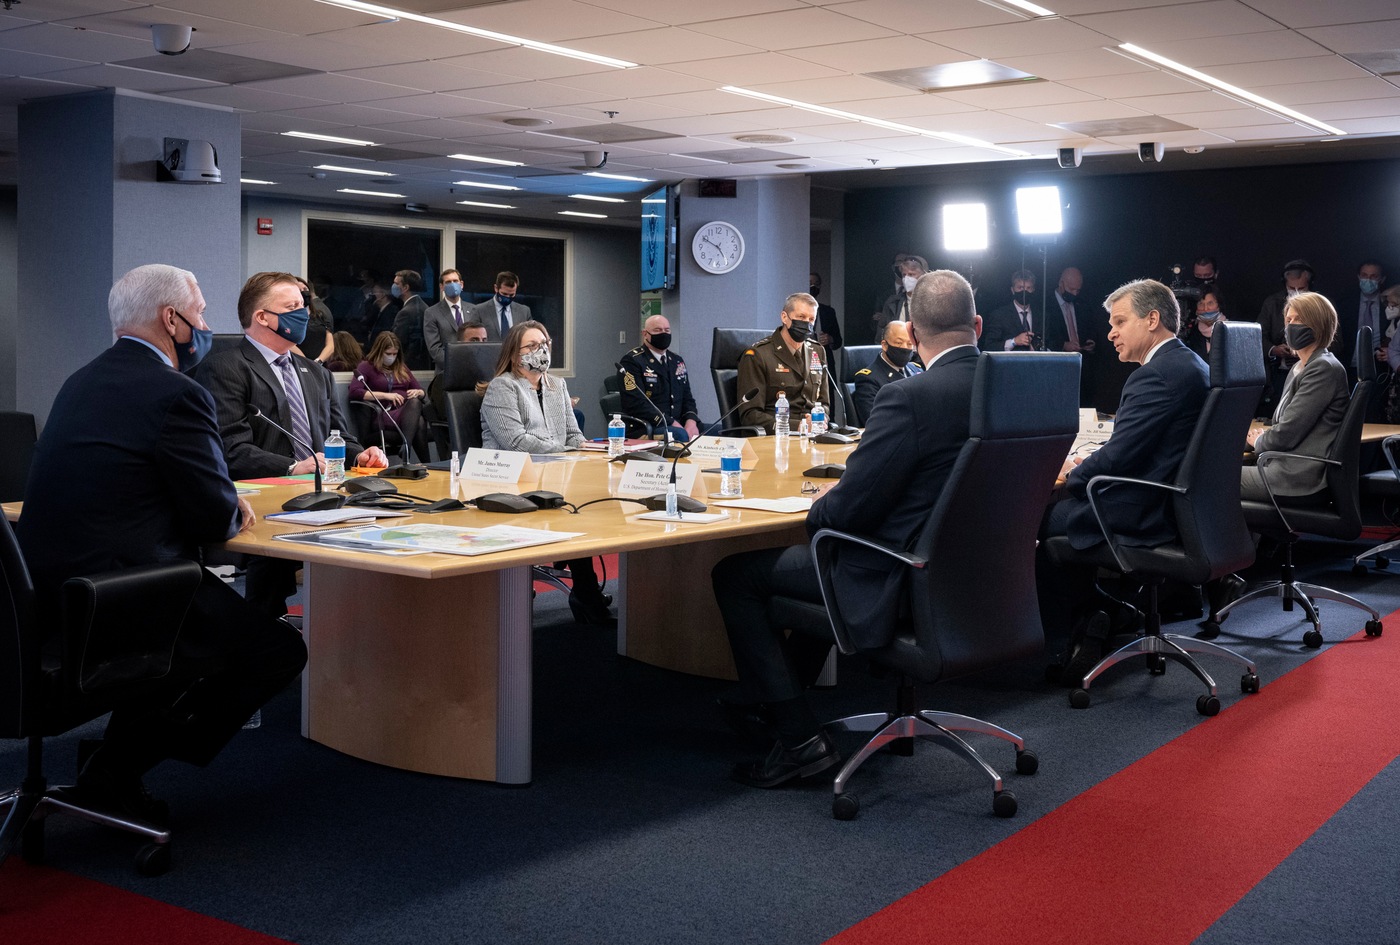 FBI Director Christopher Wray speaks during an inauguration security briefing to Vice President Mike Pence with other agency officials at FEMA Headquarters in Washington, D.C. on January 14, 2021. (Photo courtesy of Department of Homeland Security)